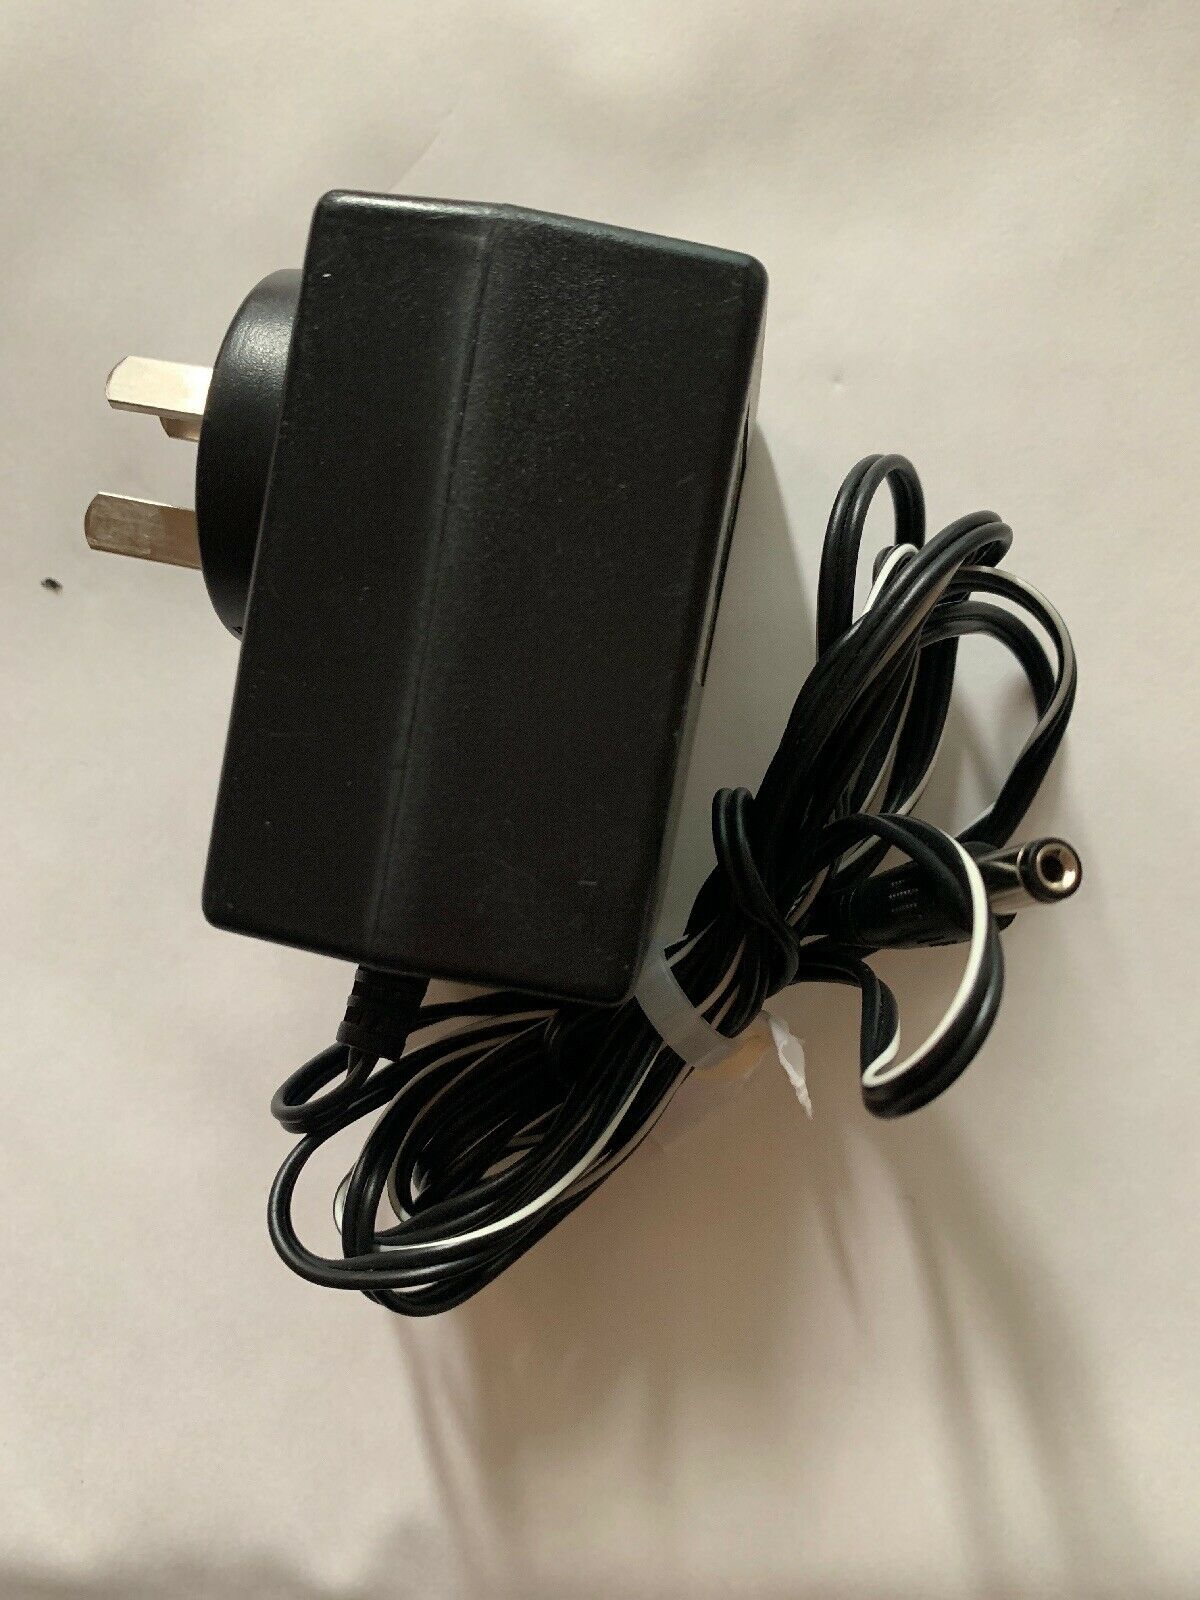 NEW Ahead JAD-0900300AS AC Adapter 9VDC 300mA power supply charger - Click Image to Close